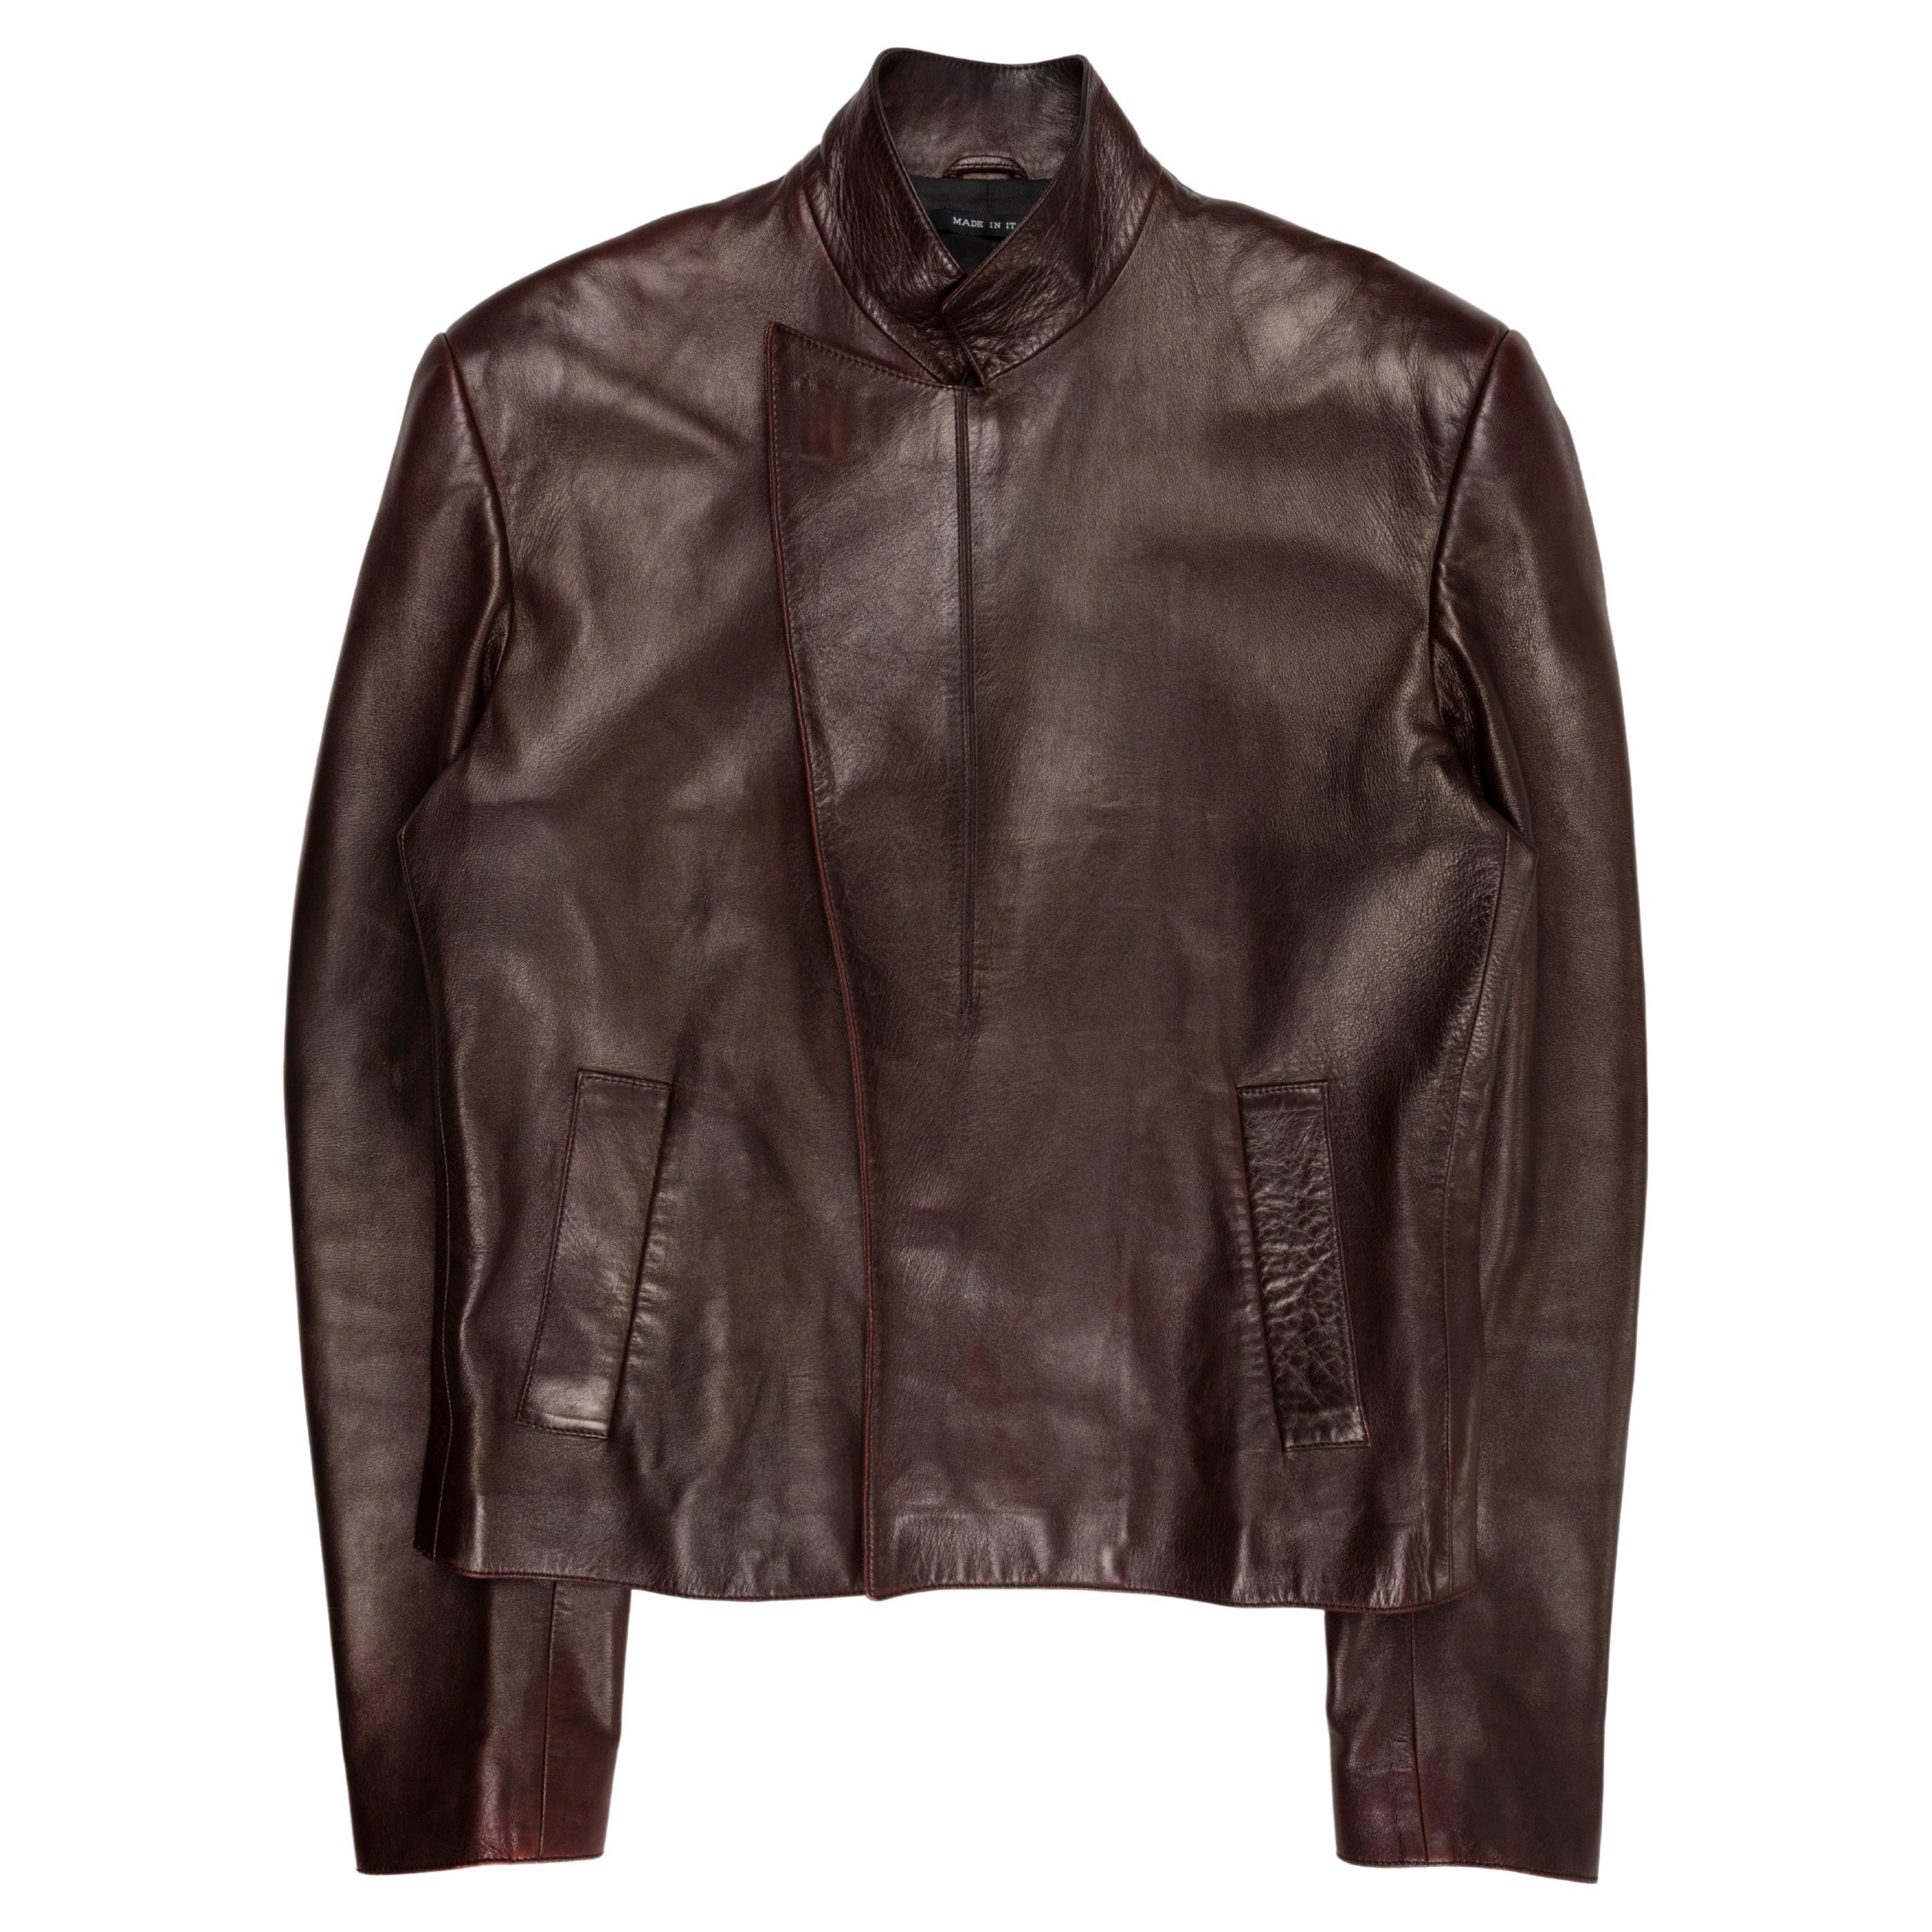 Yves Saint Laurent Rive Gauche by Hedi Slimane AW1998 Leather Jacket